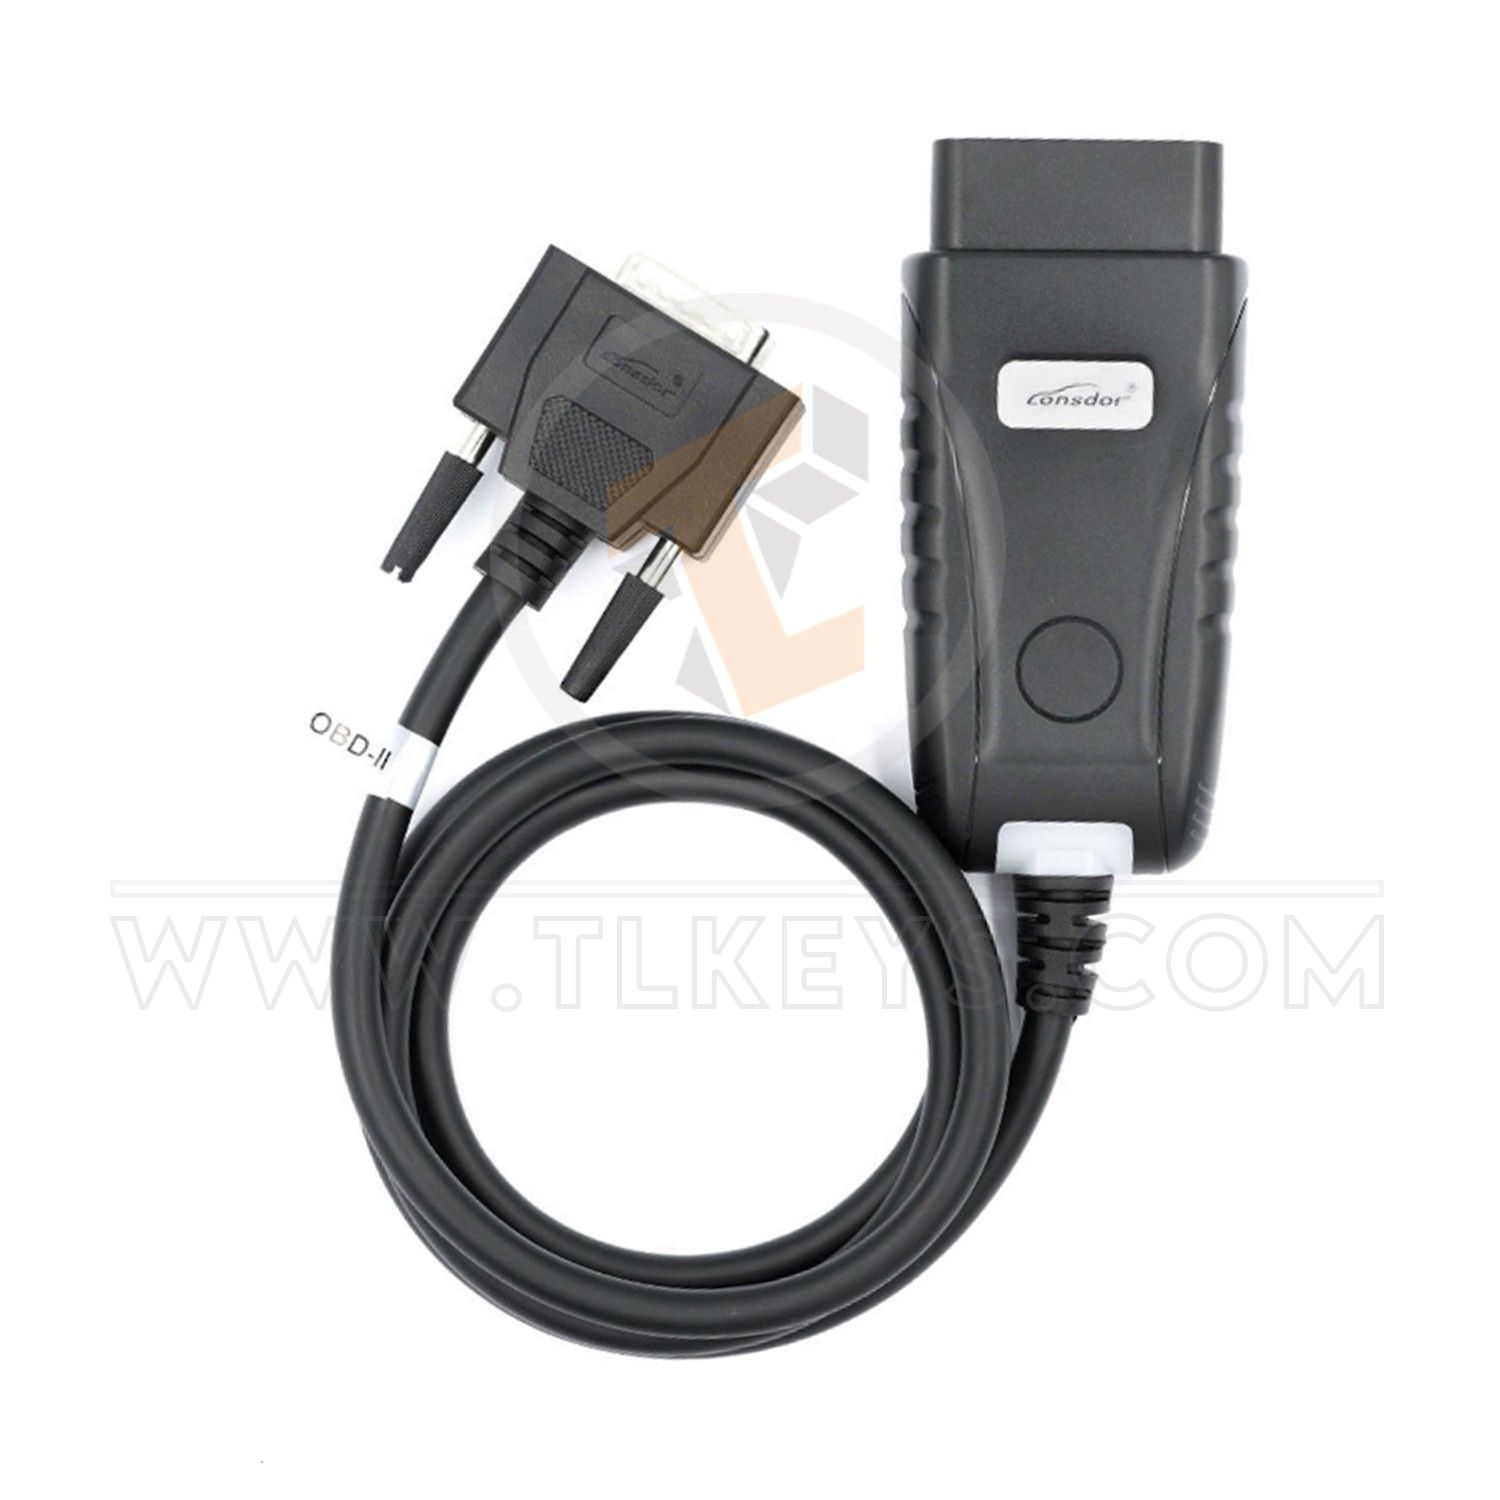 Lonsdor K518 Pro Replacement OBD II Cable Status Aftermarket